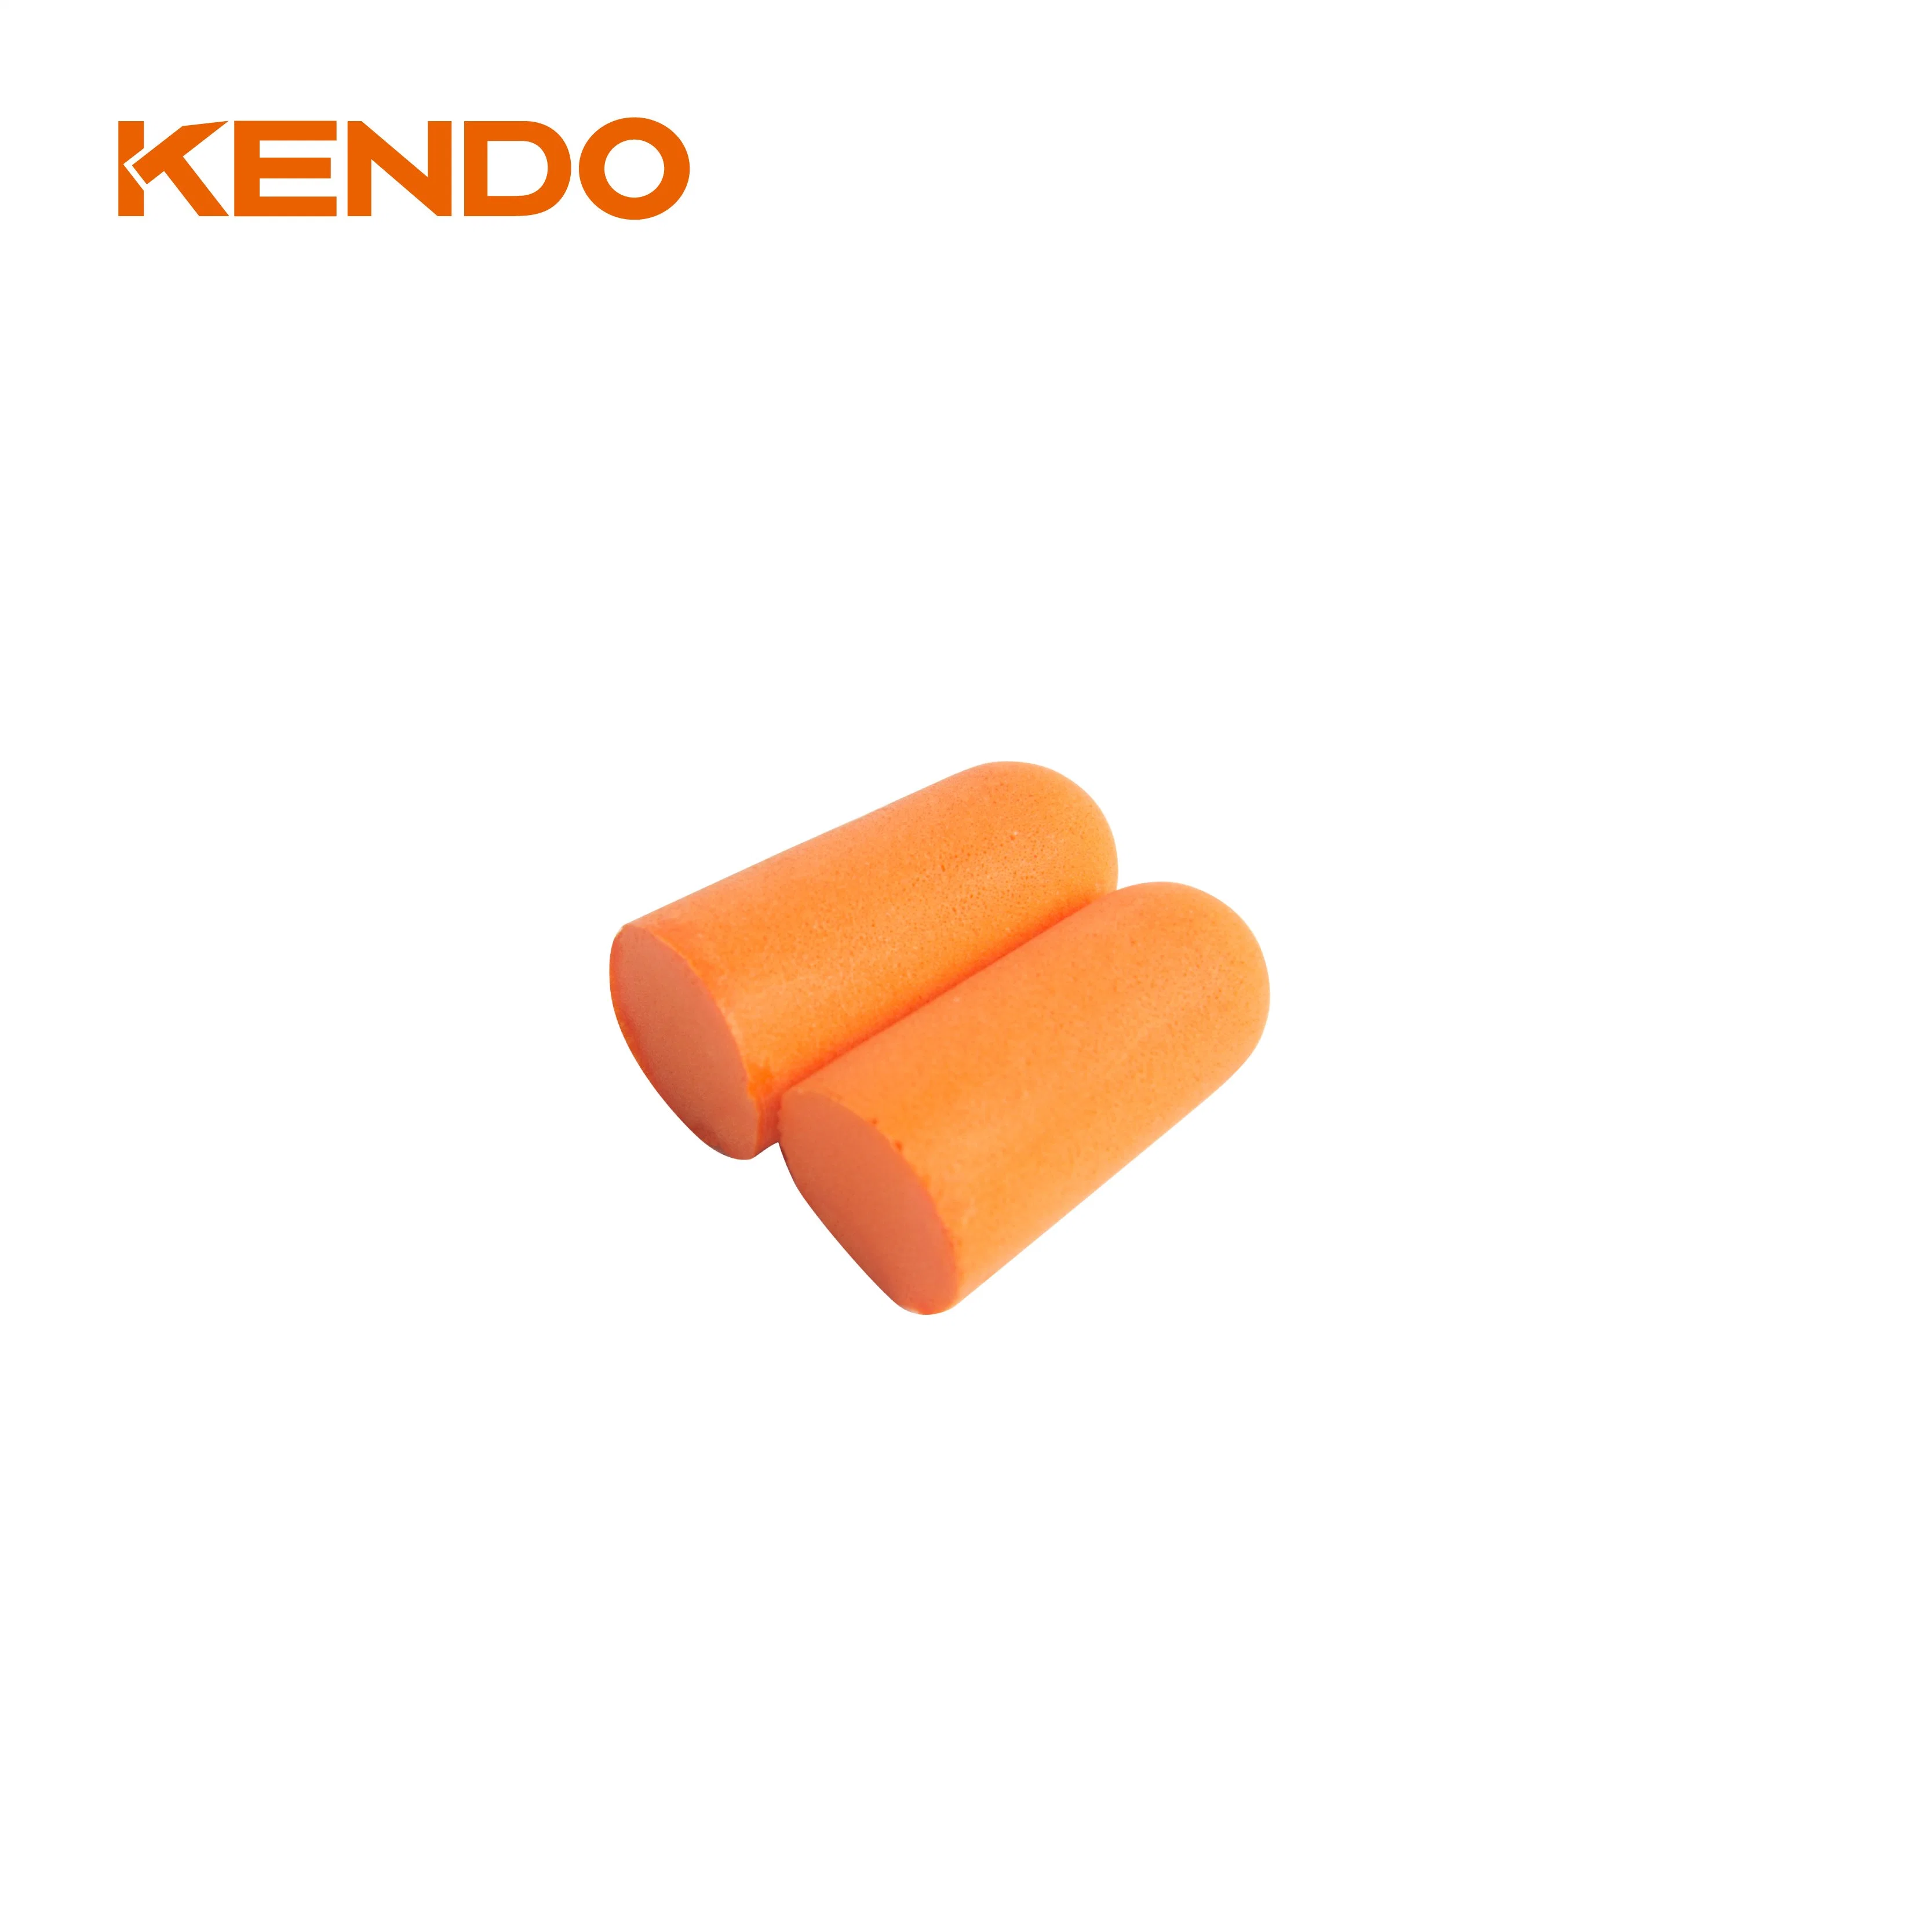 Ear Plug Snr 38 dB Superior Noise Reduction Effect Helps to Protect Hearing in High Ambient Noise